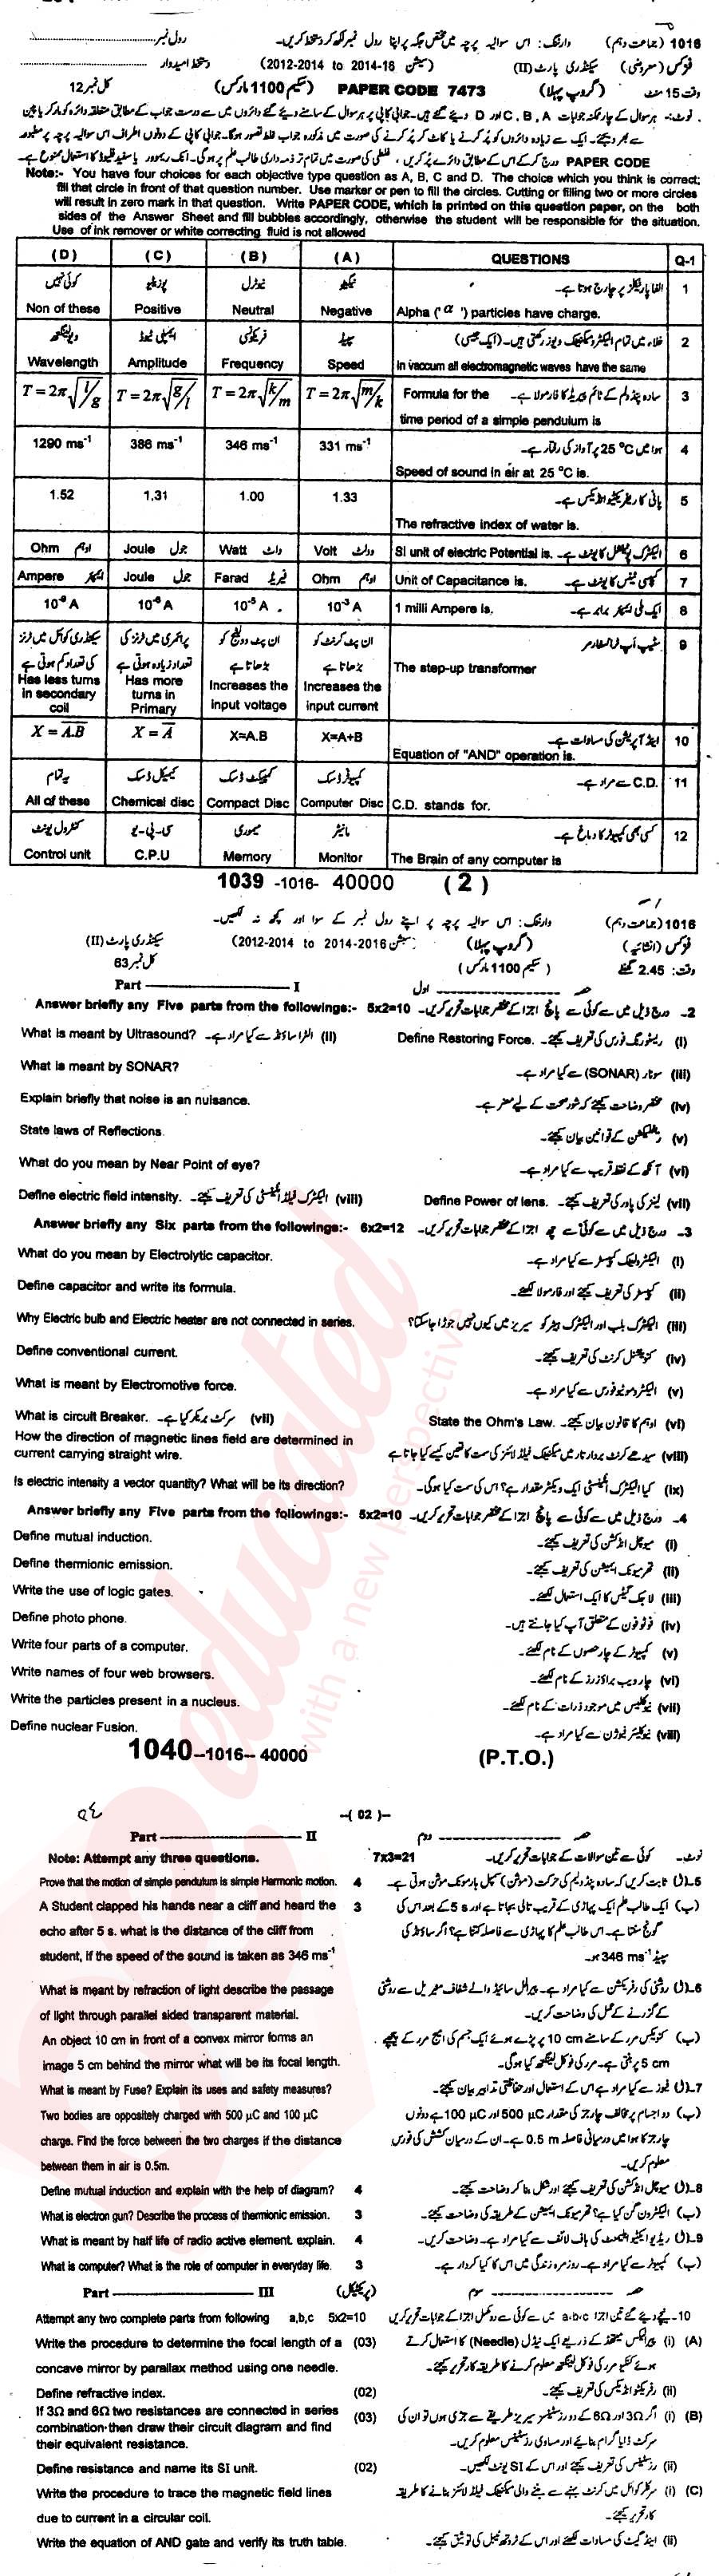 Physics 10th class Past Paper Group 1 BISE Sargodha 2016